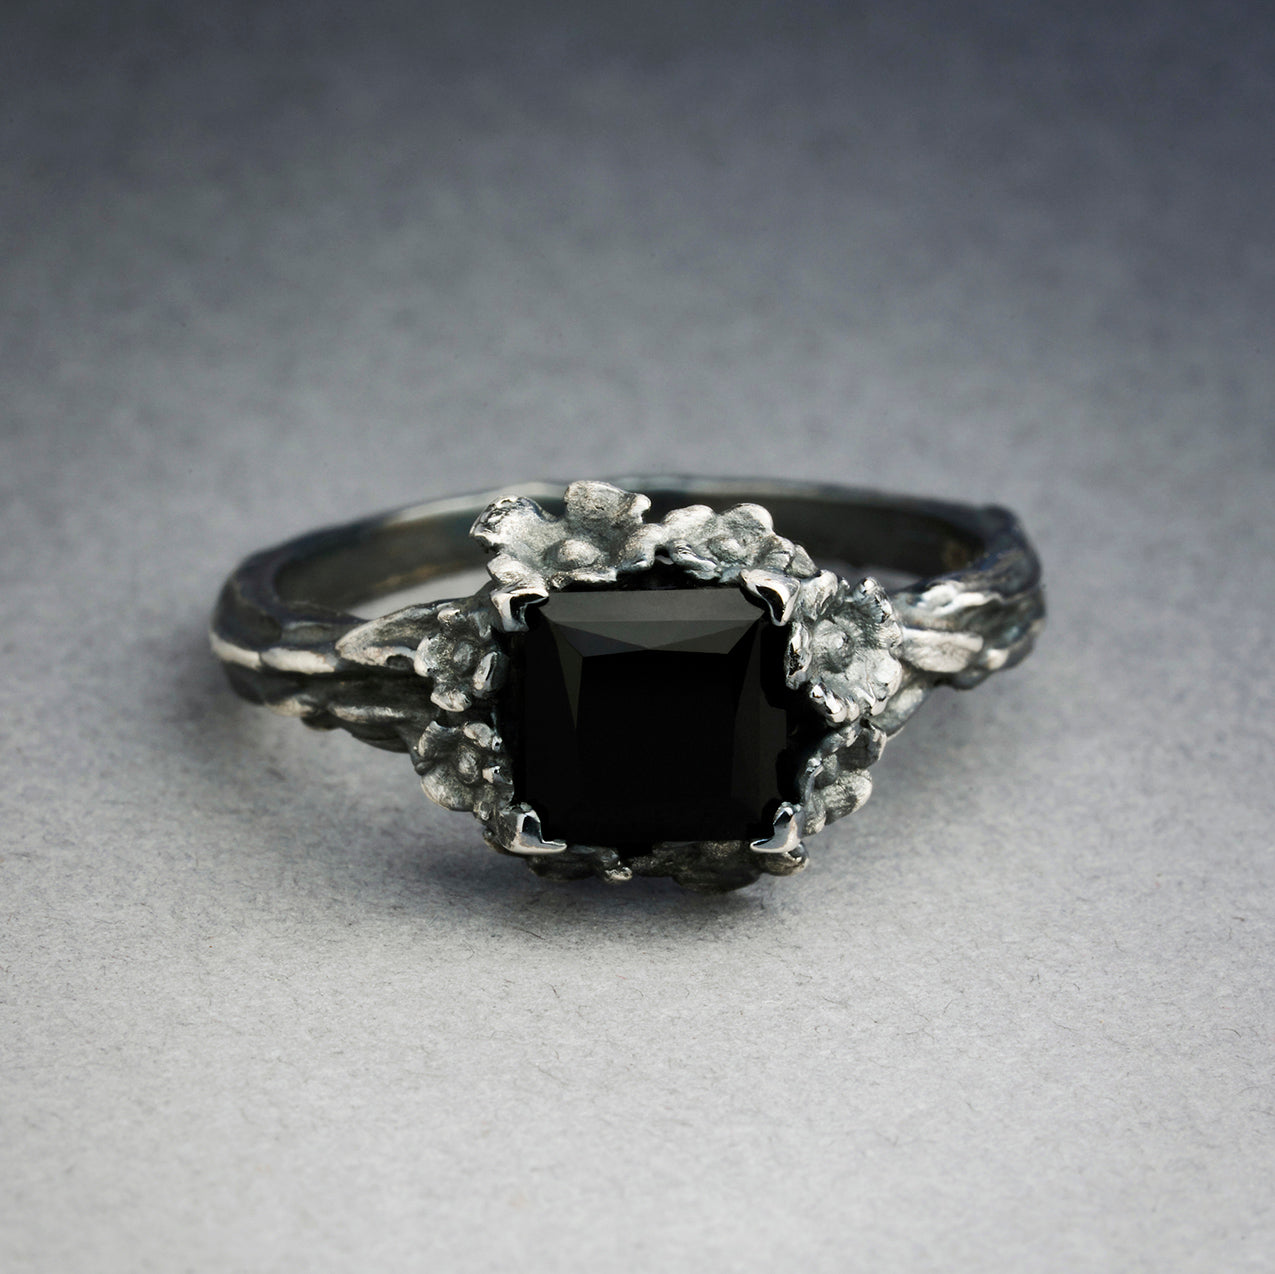 Mini Onyx Forget Me Not Ring